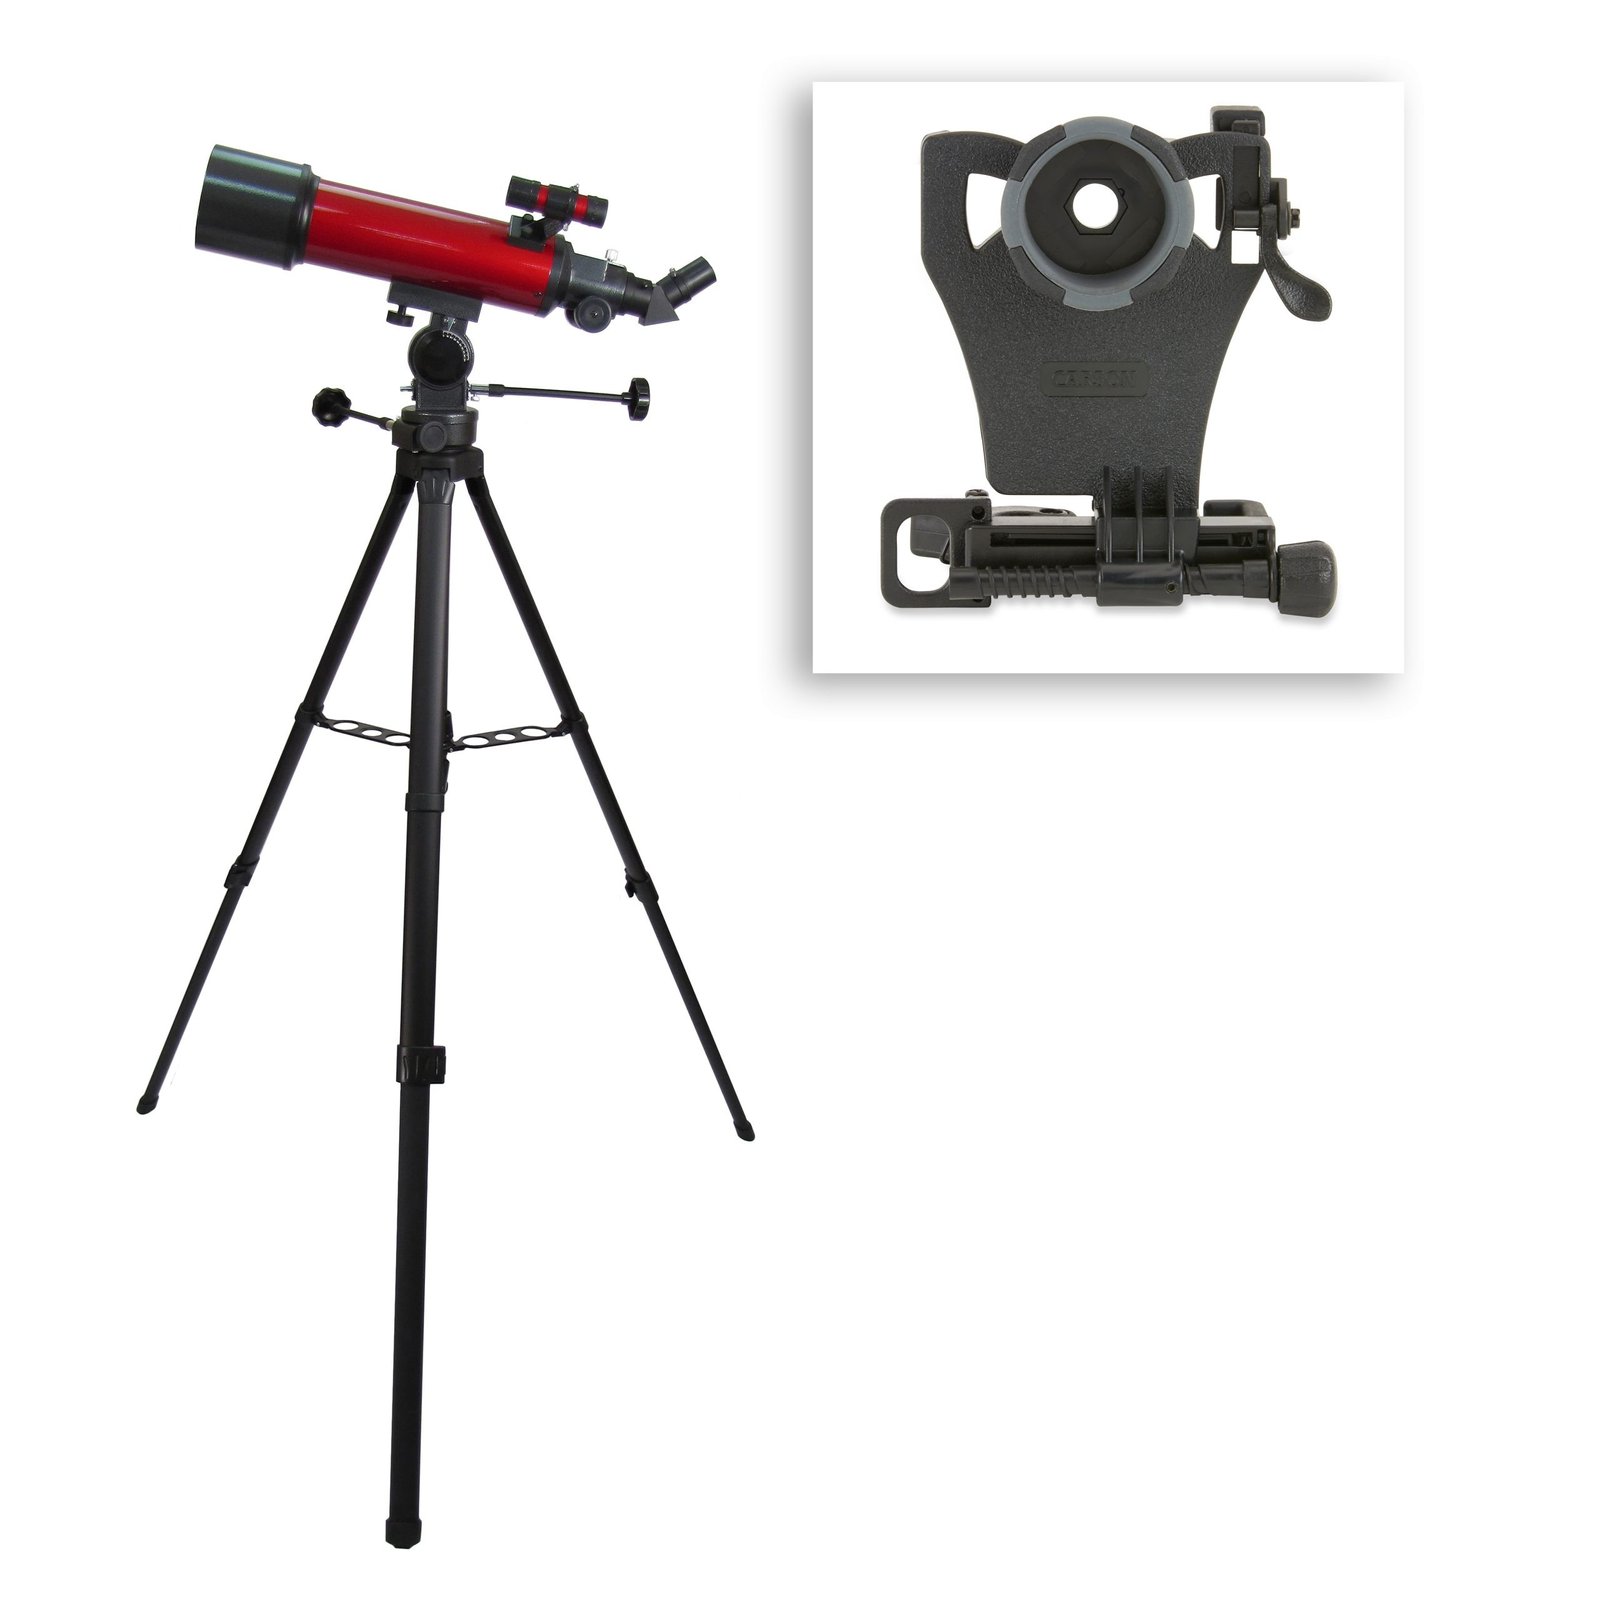 Series Red Refractor Carson – Universal Telescope, Adapter 25-56x80mm Digiscoping TheRealOptics Planet Smartphone